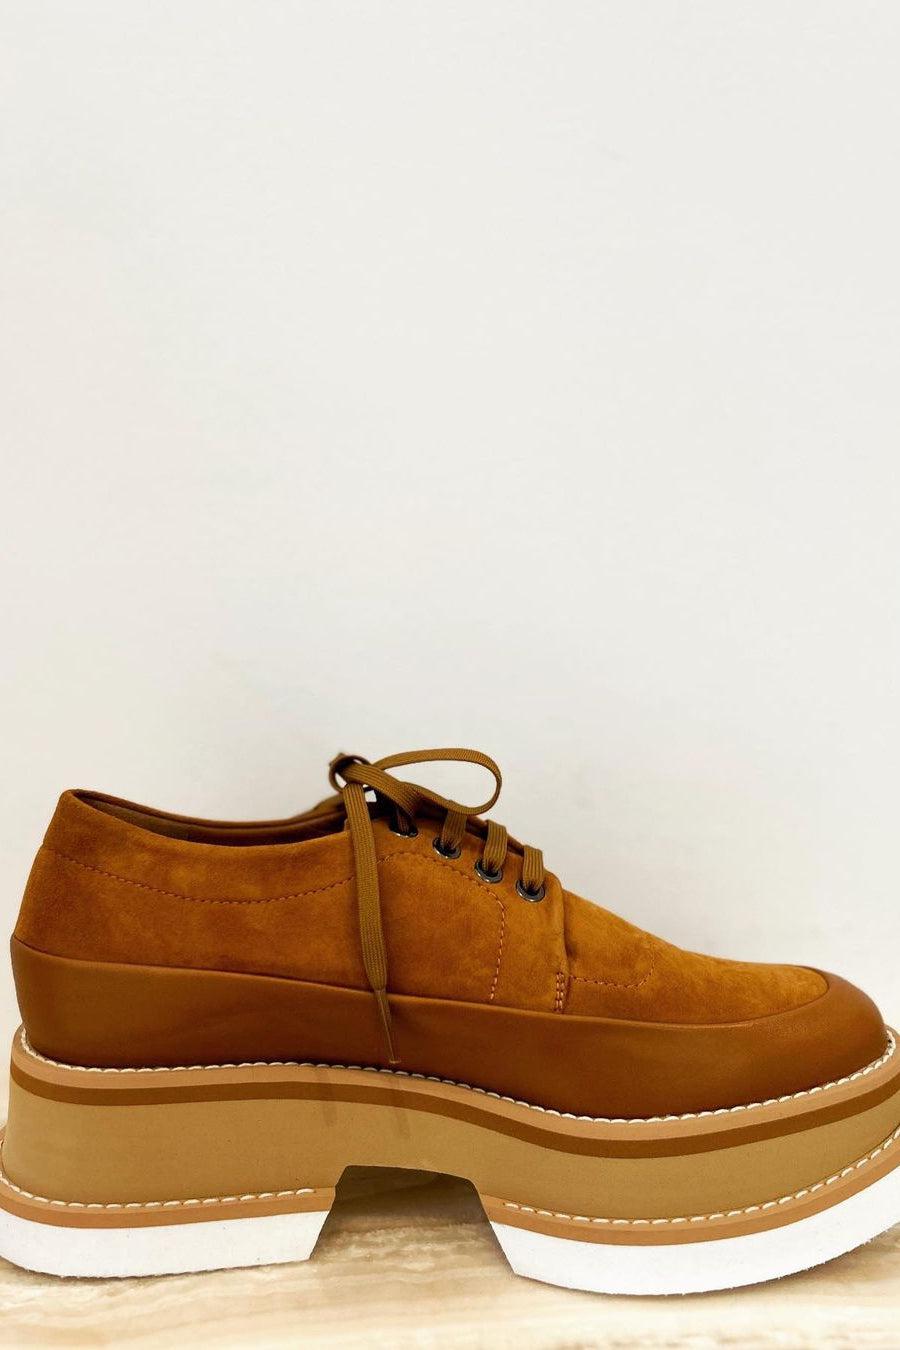 BECK RUST CALF SHOES-Shoes-Clergerie-Debs Boutique